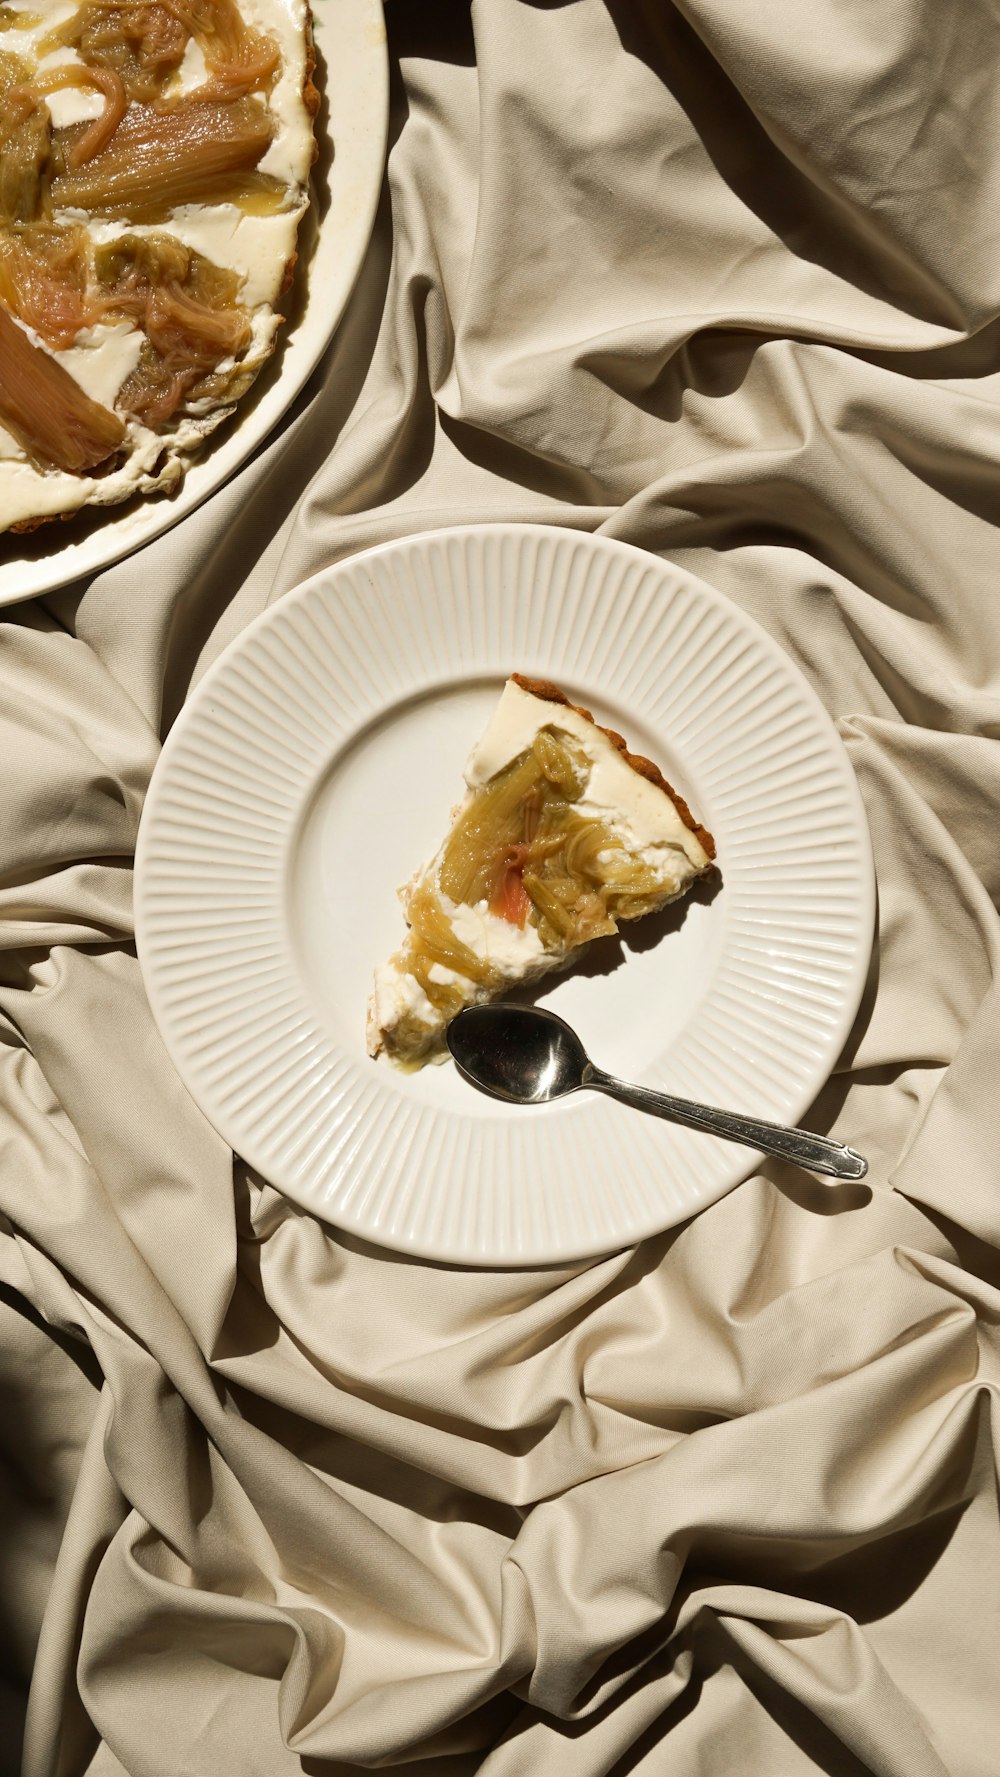 a slice of pie on a plate with a fork